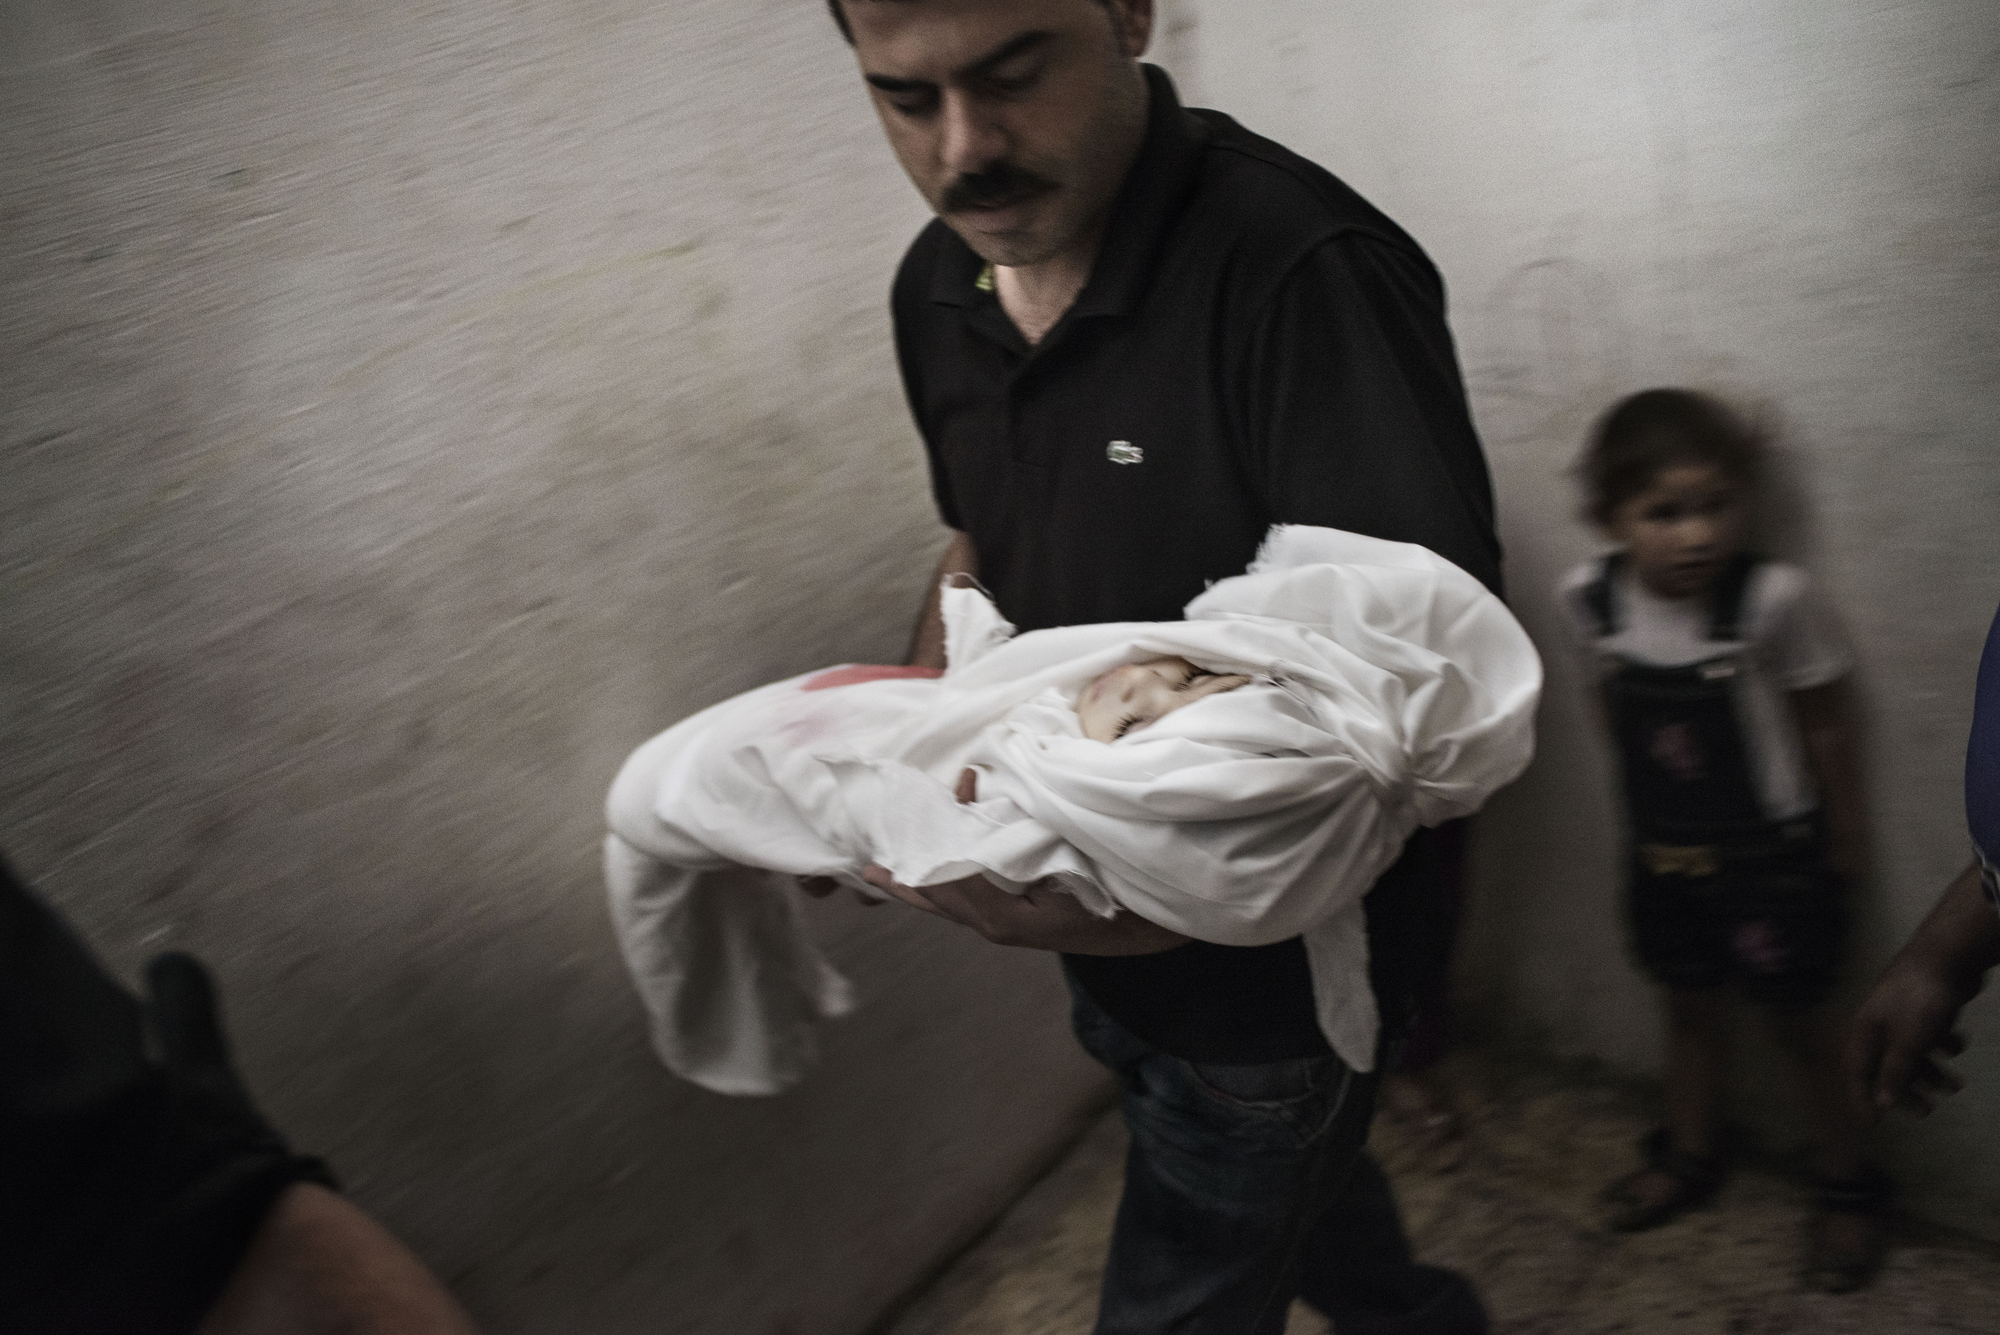 The father of 18-month-old Razel Netzlream, who was fatally wounded during an airstrike, carries her body right before her funeral, in Rafah, Gaza Strip, July 18, 2014.